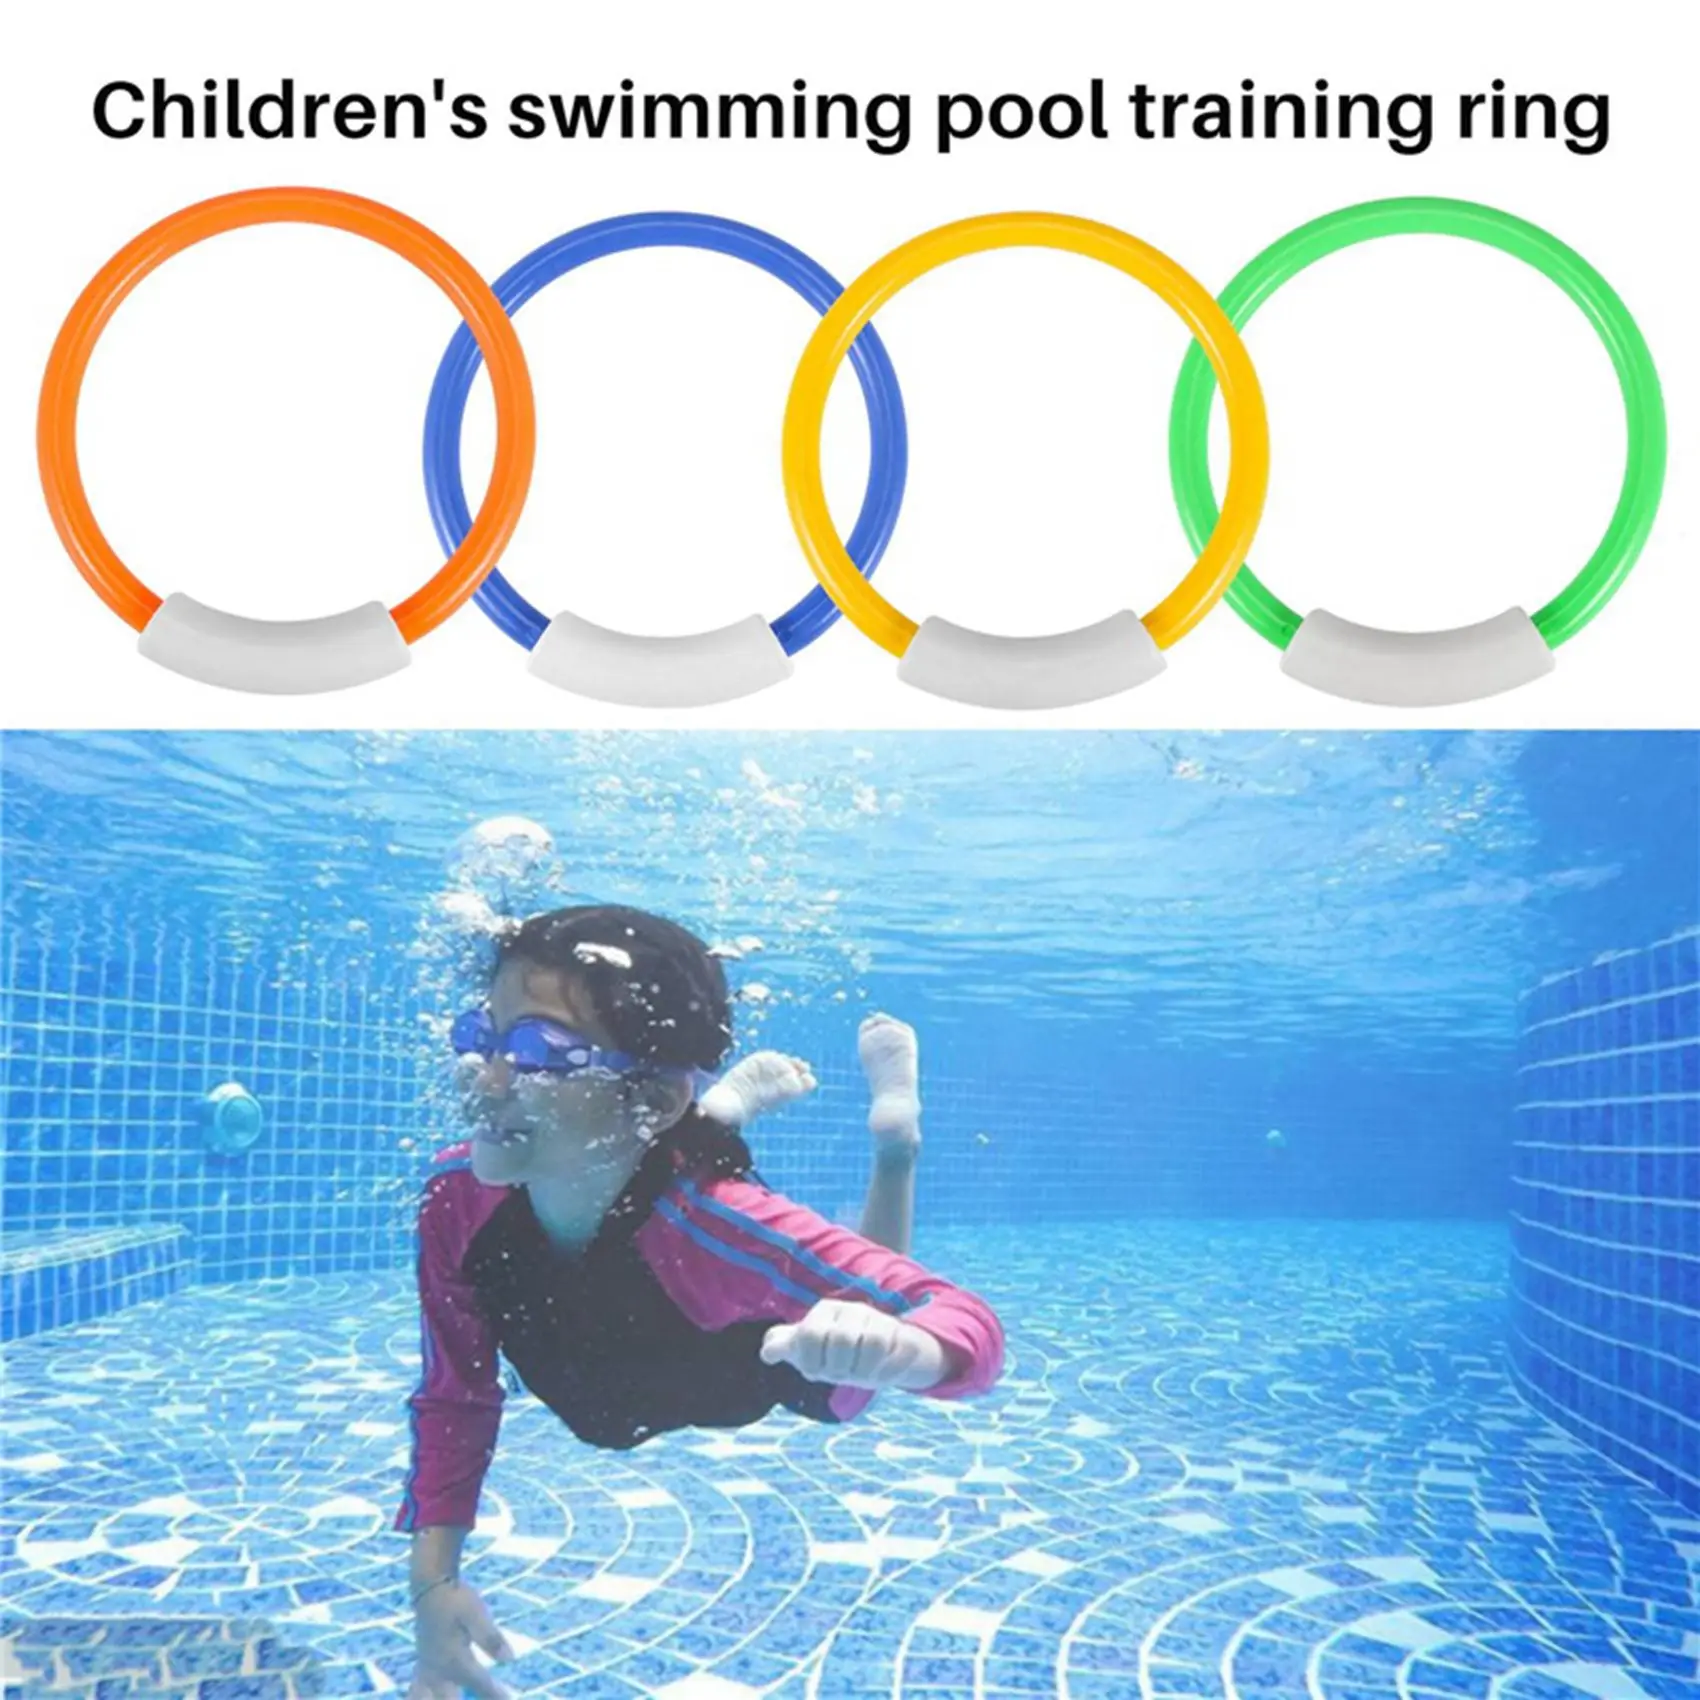 

Diving Rings Swimming Pool Toy Rings 4 Pack Toys for Kids Plastic Diving Ring Colorful Sinking Pool Rings Dive Training